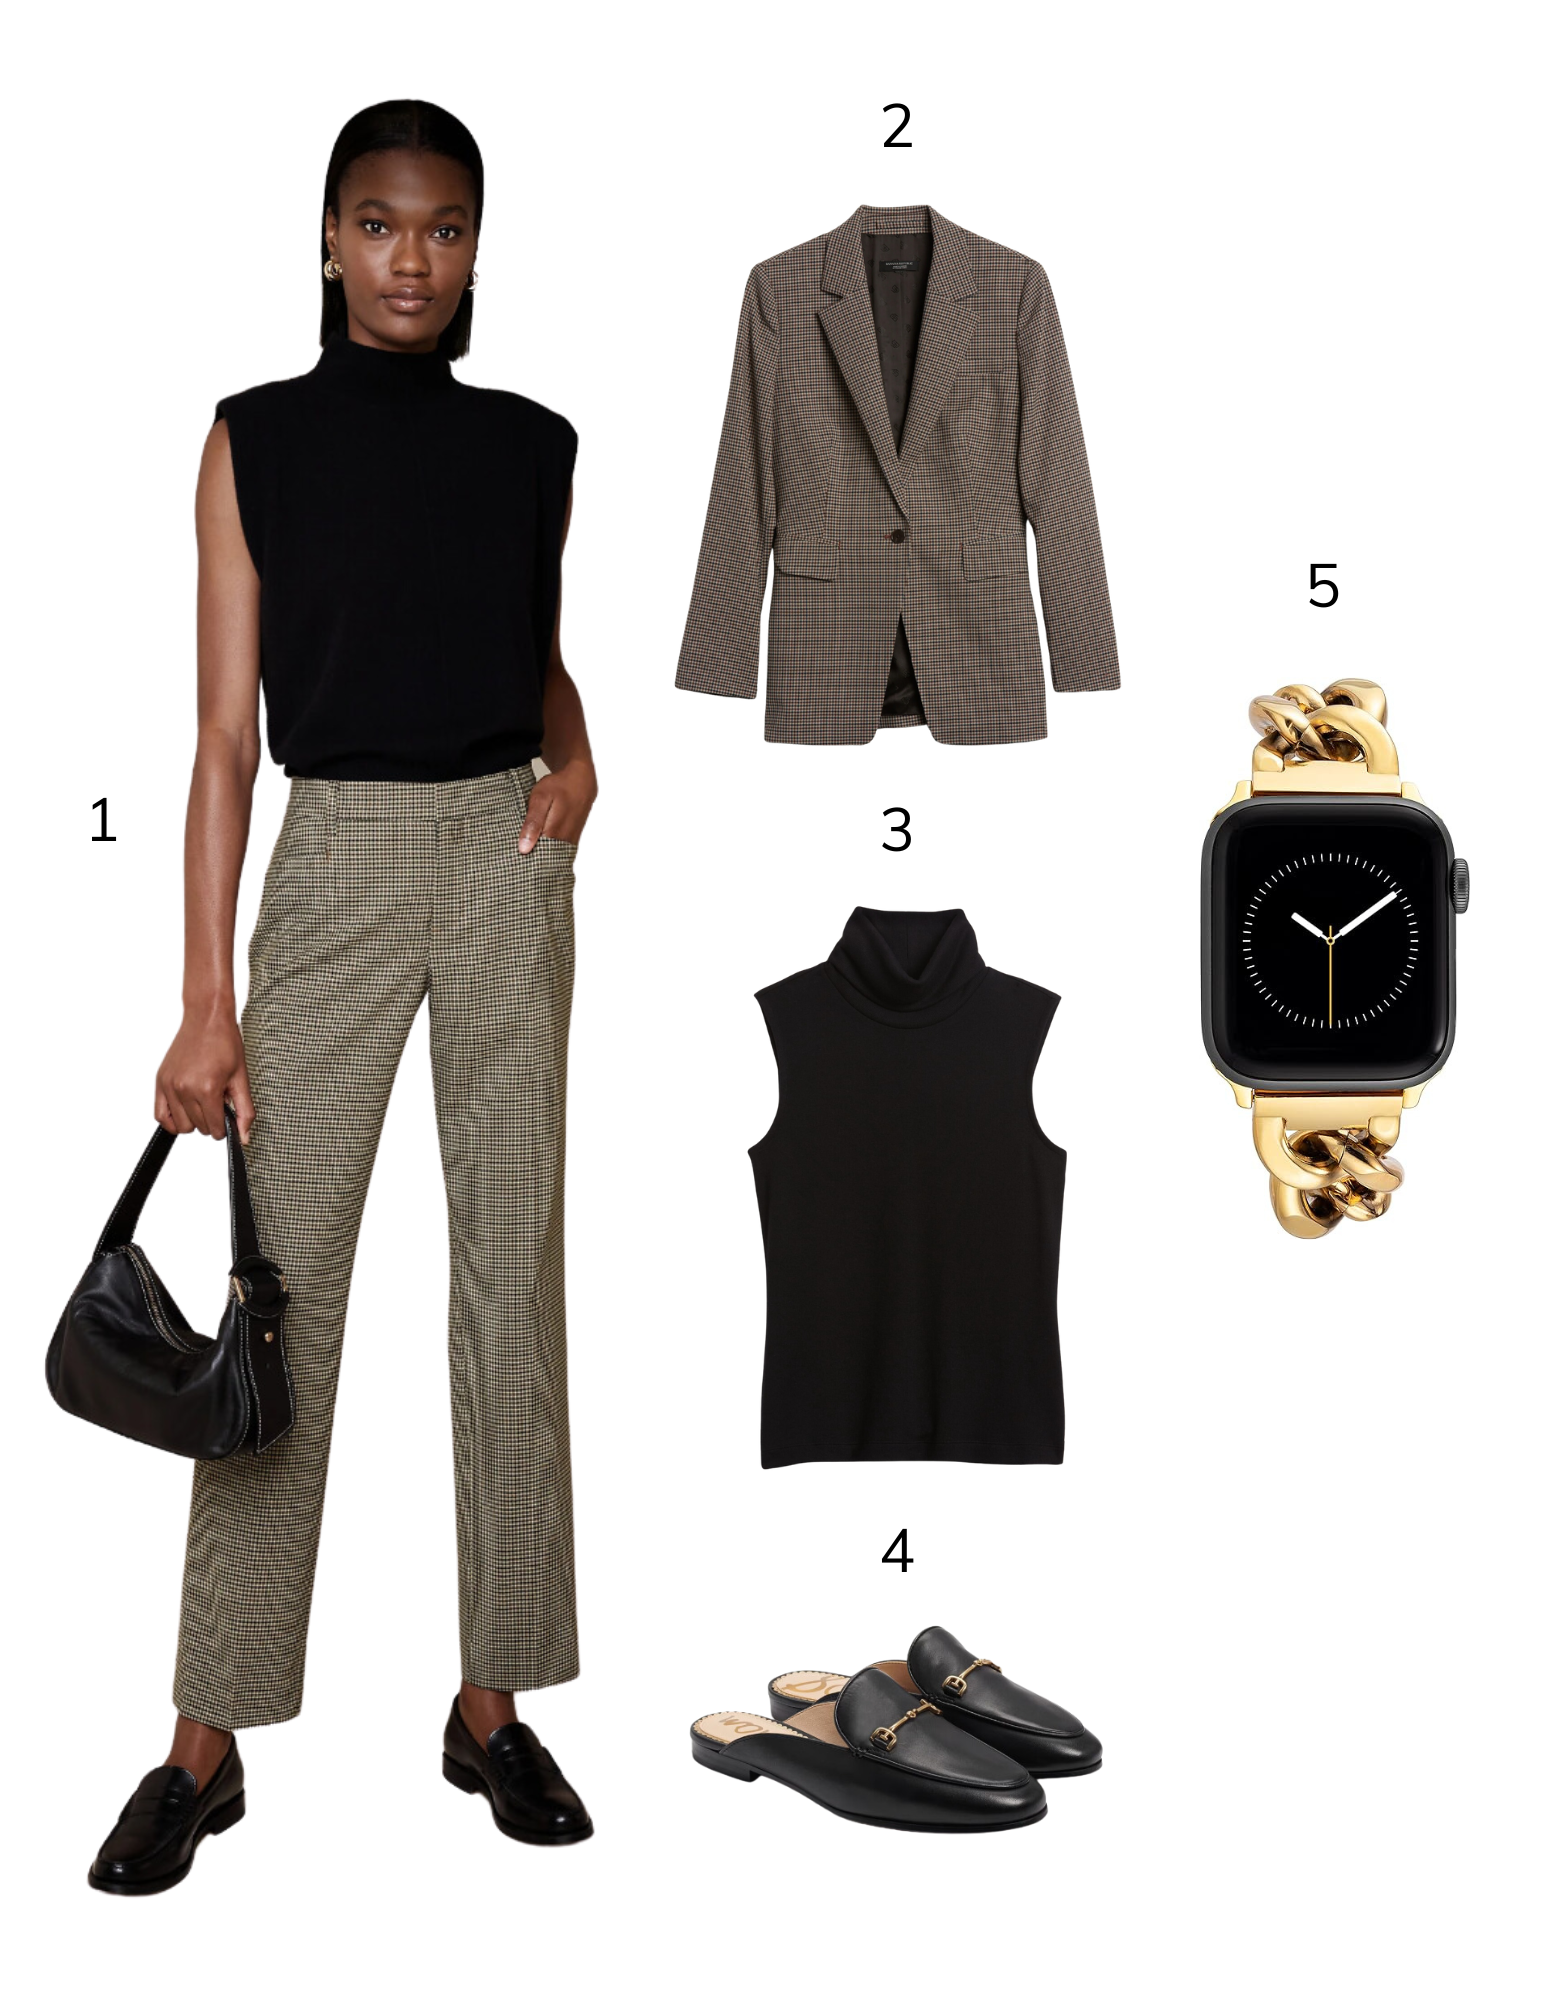 Amazing Outfits  Work outfits women, Fashionable work outfit